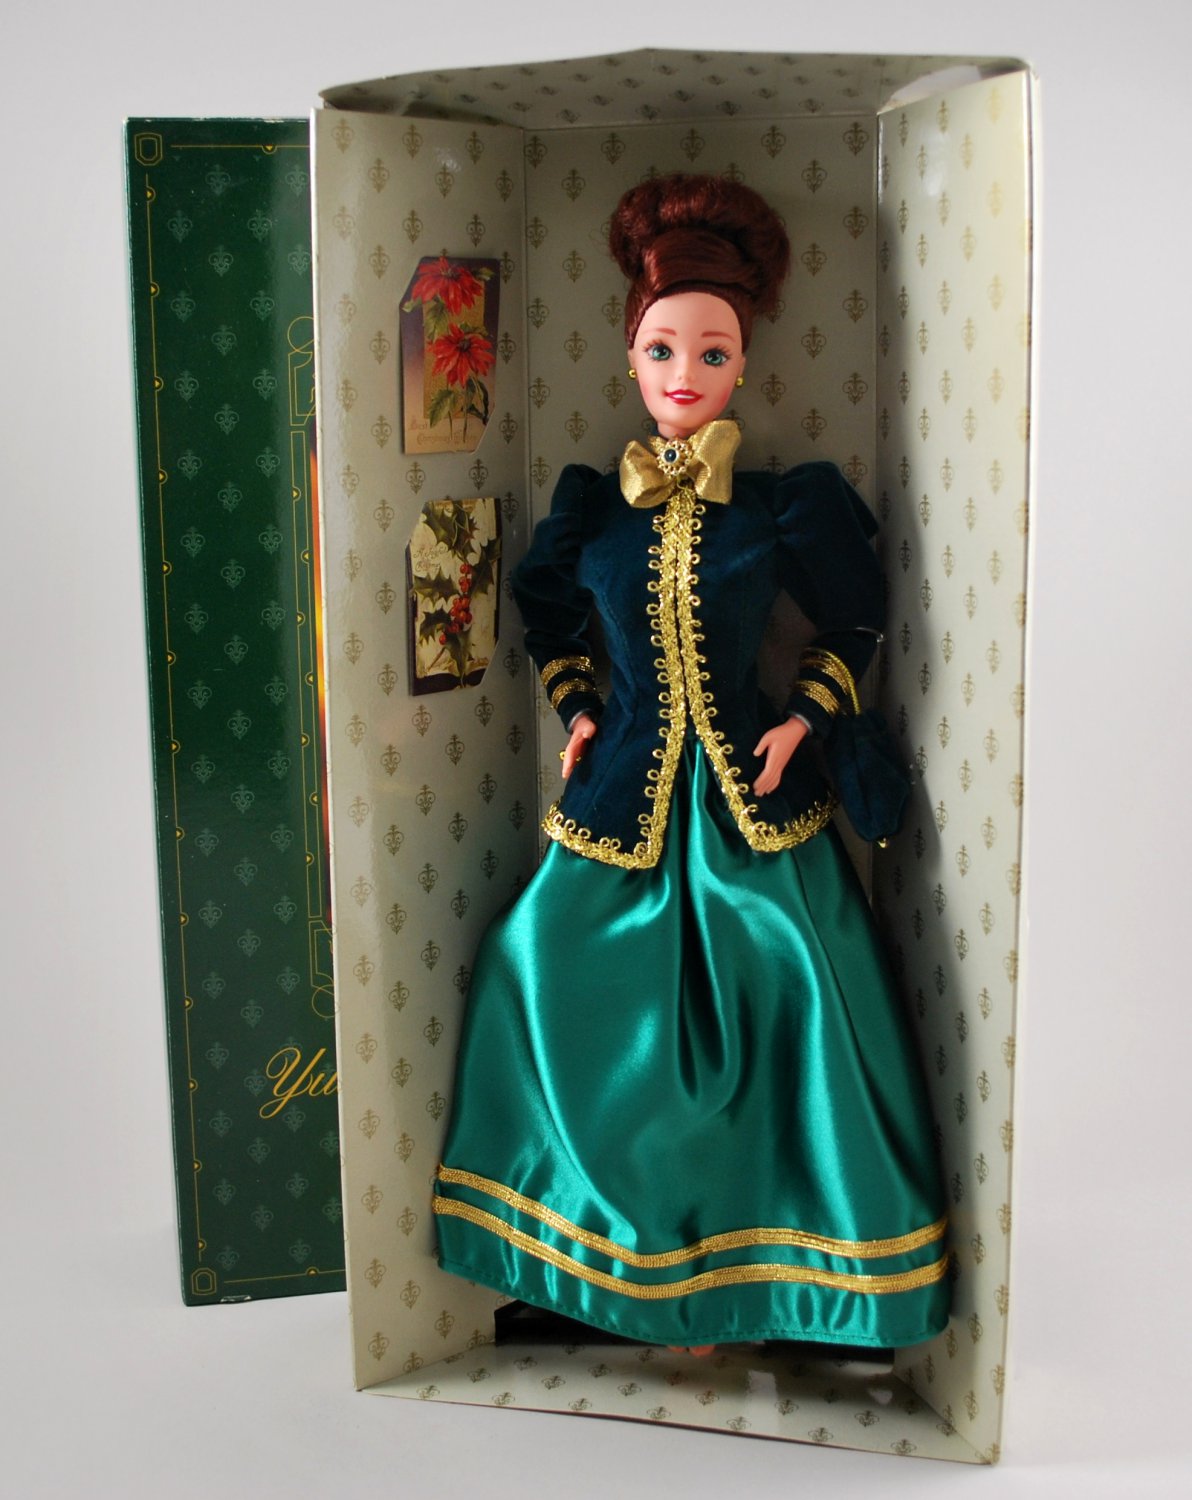 Details about   YULETIDE ROMANCE BARBIE...BRAND NEW./..THIRD IN A SERIES...1994 